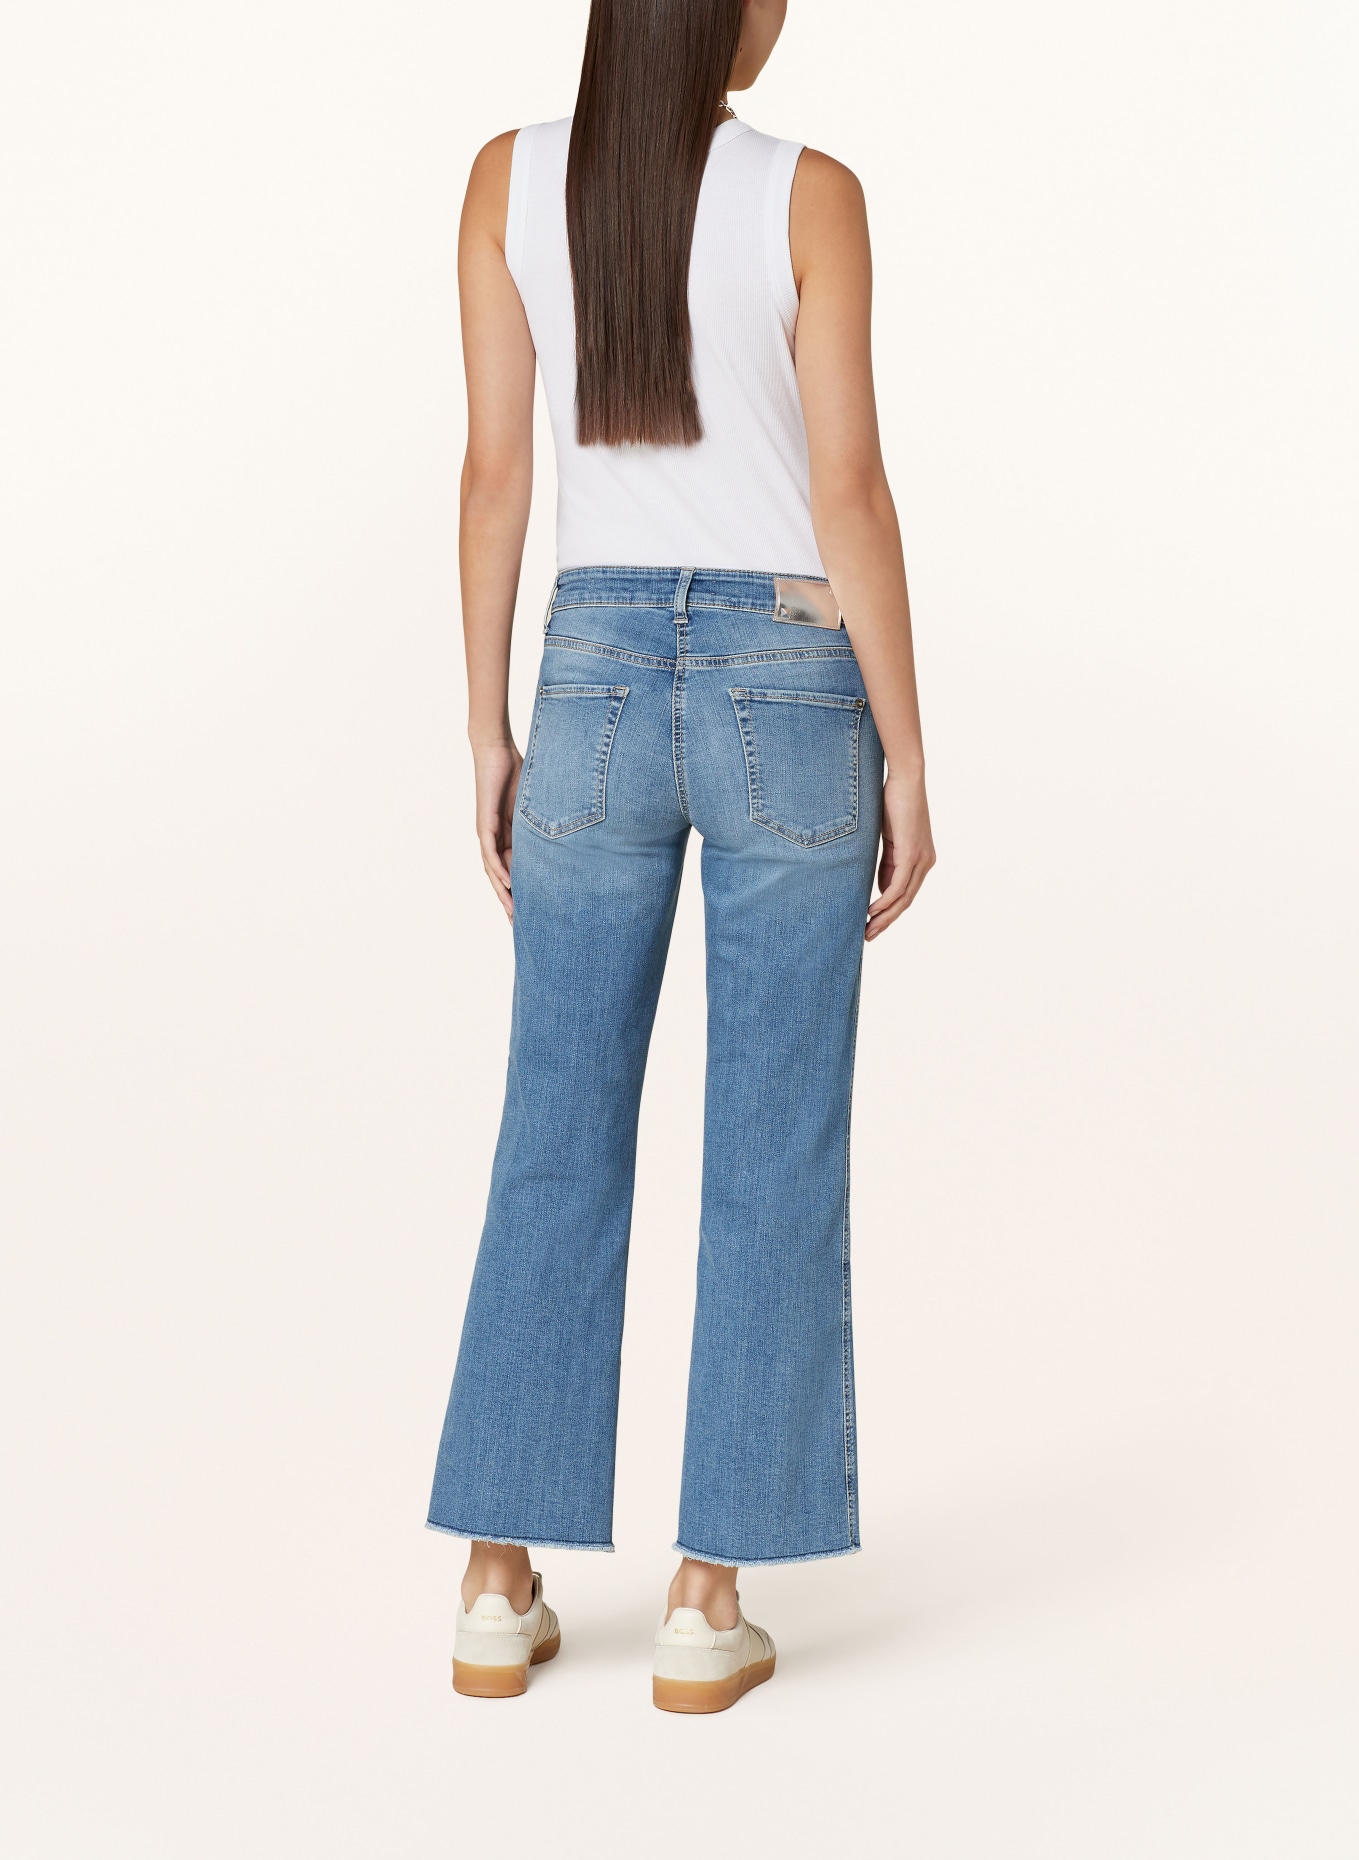 CAMBIO Bootcut jeans FRANCESCA, Color: 5291 mid used fringed (Image 3)